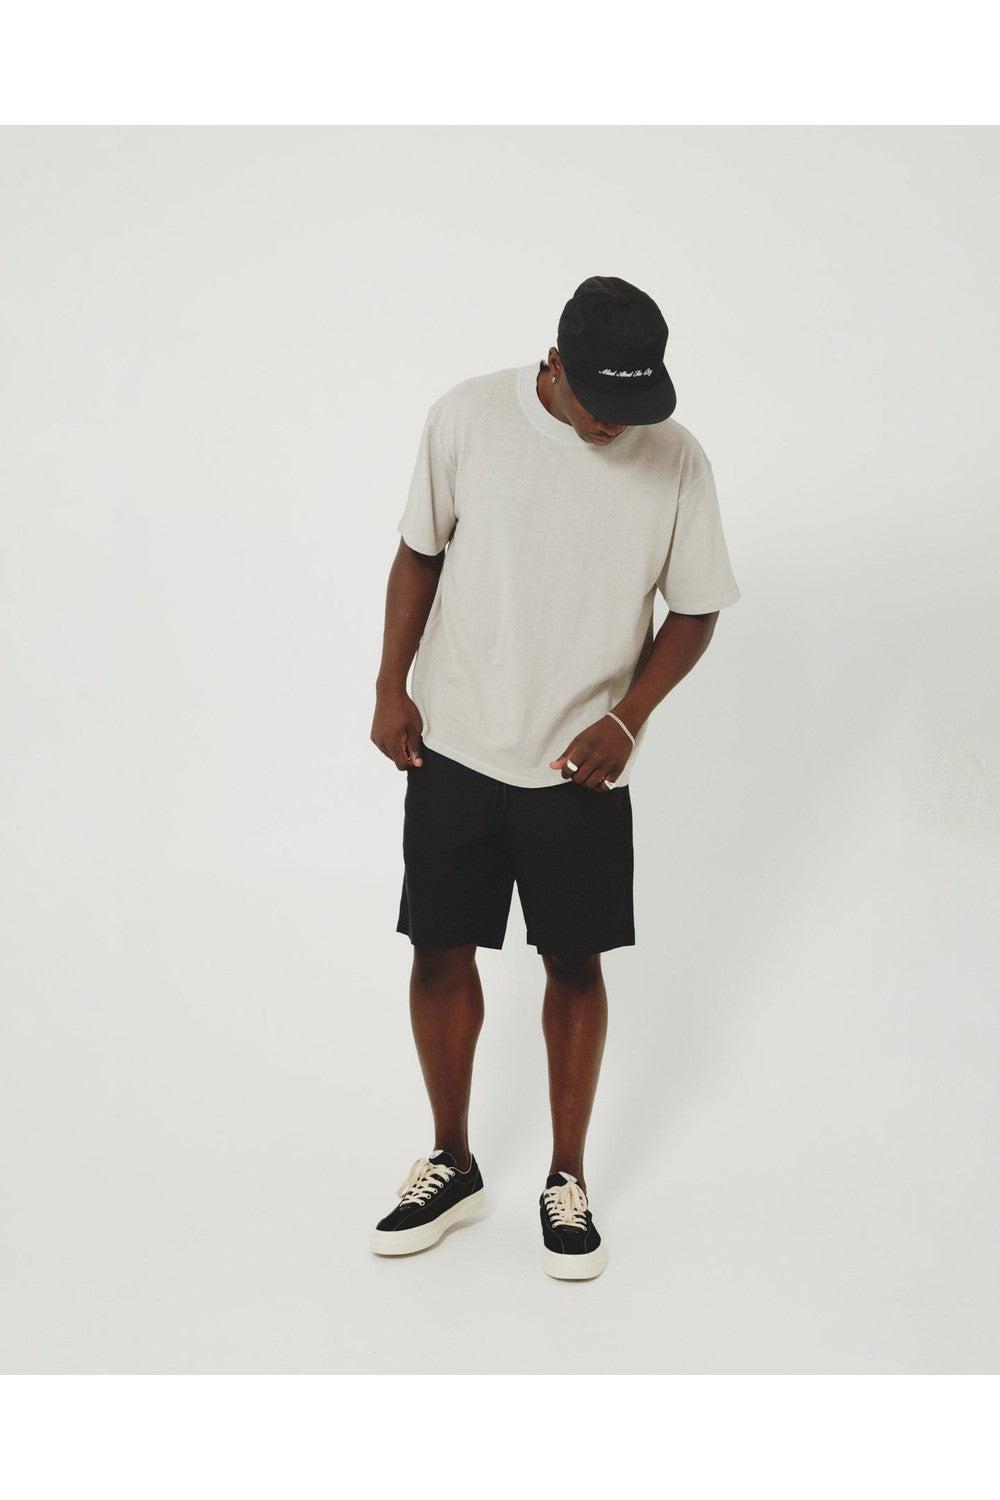 HEMP JERSEY SS TEE / STONE | COMMONERS | Mad About The Boy